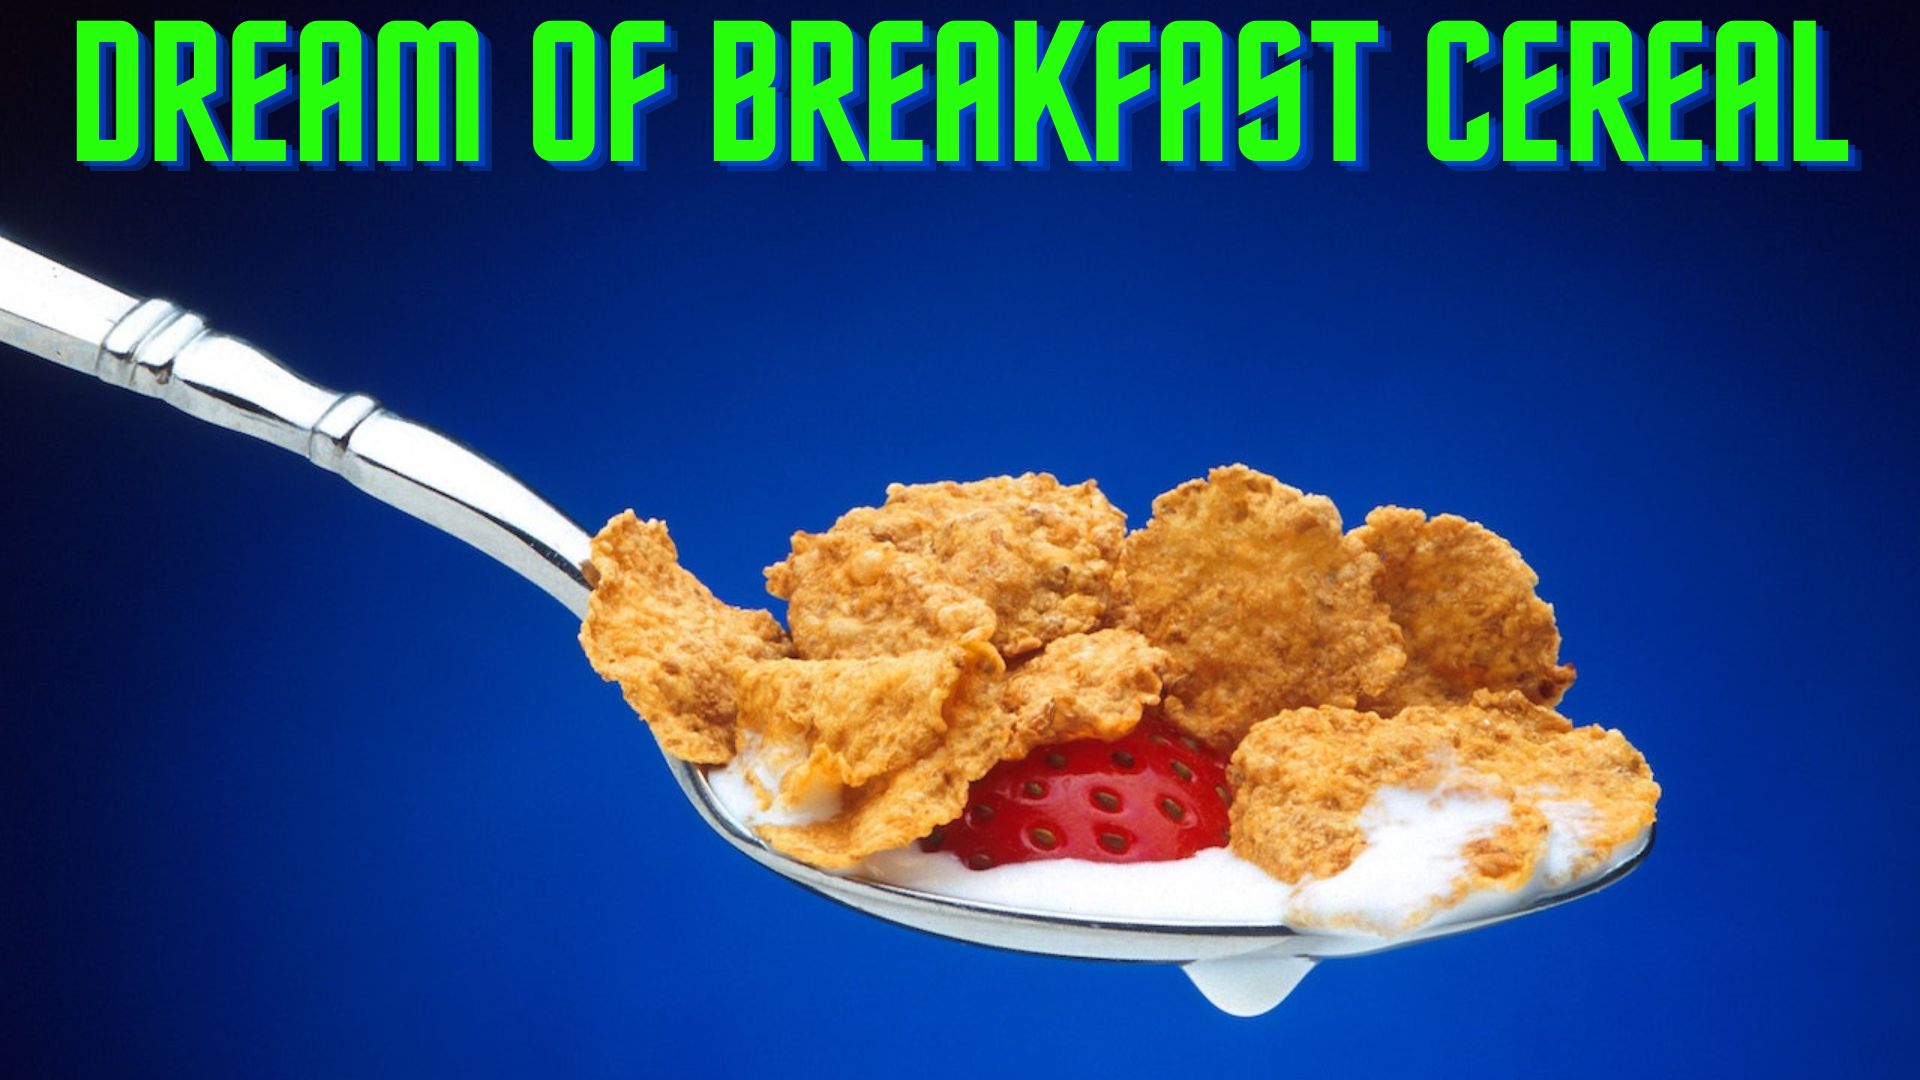 Dream Of Breakfast Cereal - Symbolizes Your Willingness To Start Afresh